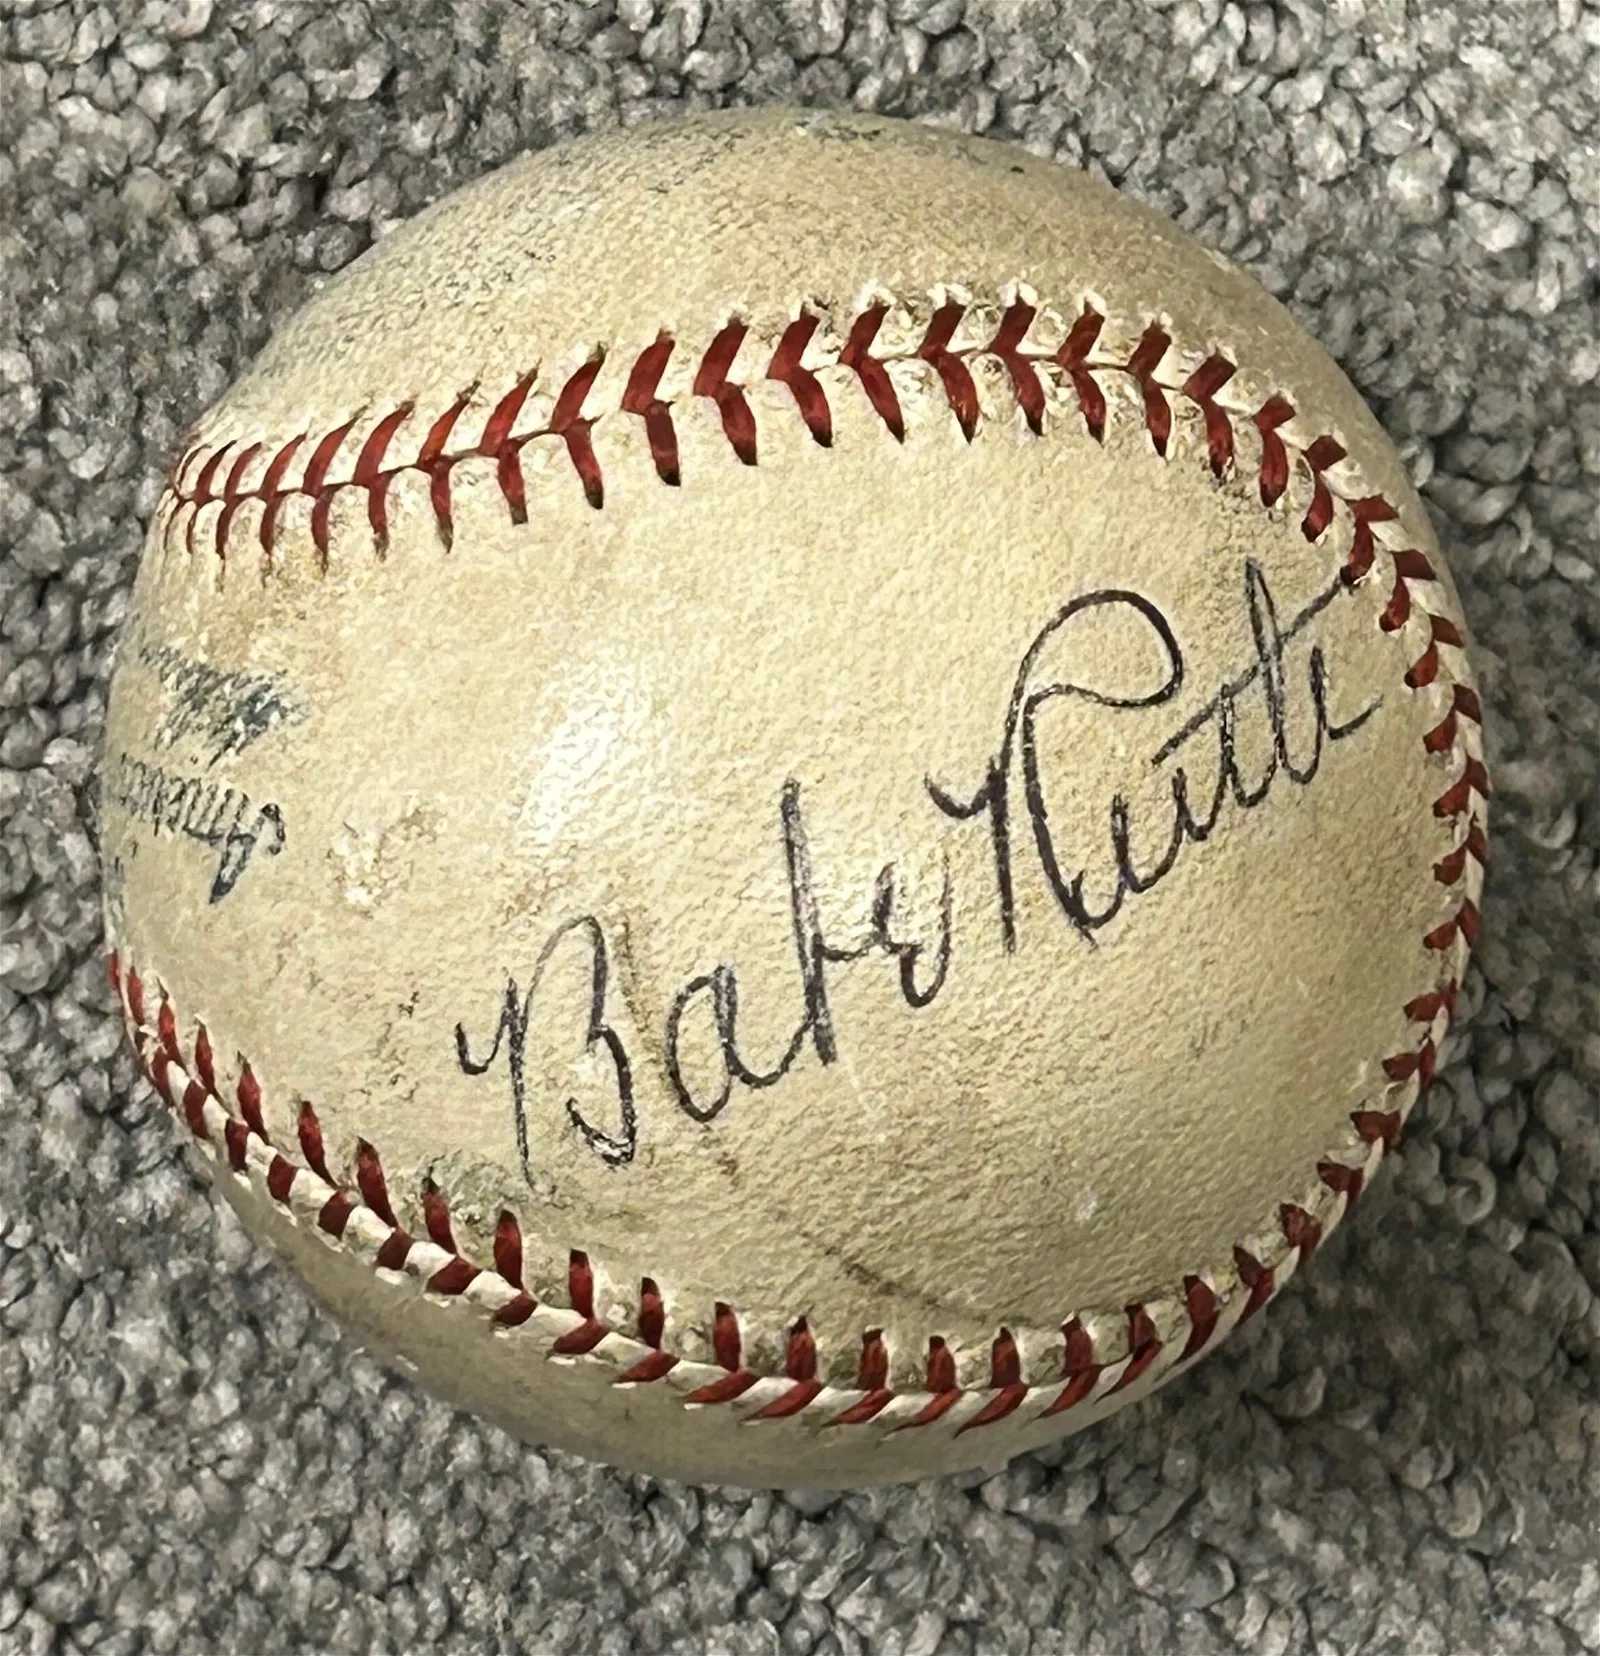 Babe Ruth-signed official league ball with clear signature, estimated at $10,000-$20,000 at Piece of the Past.